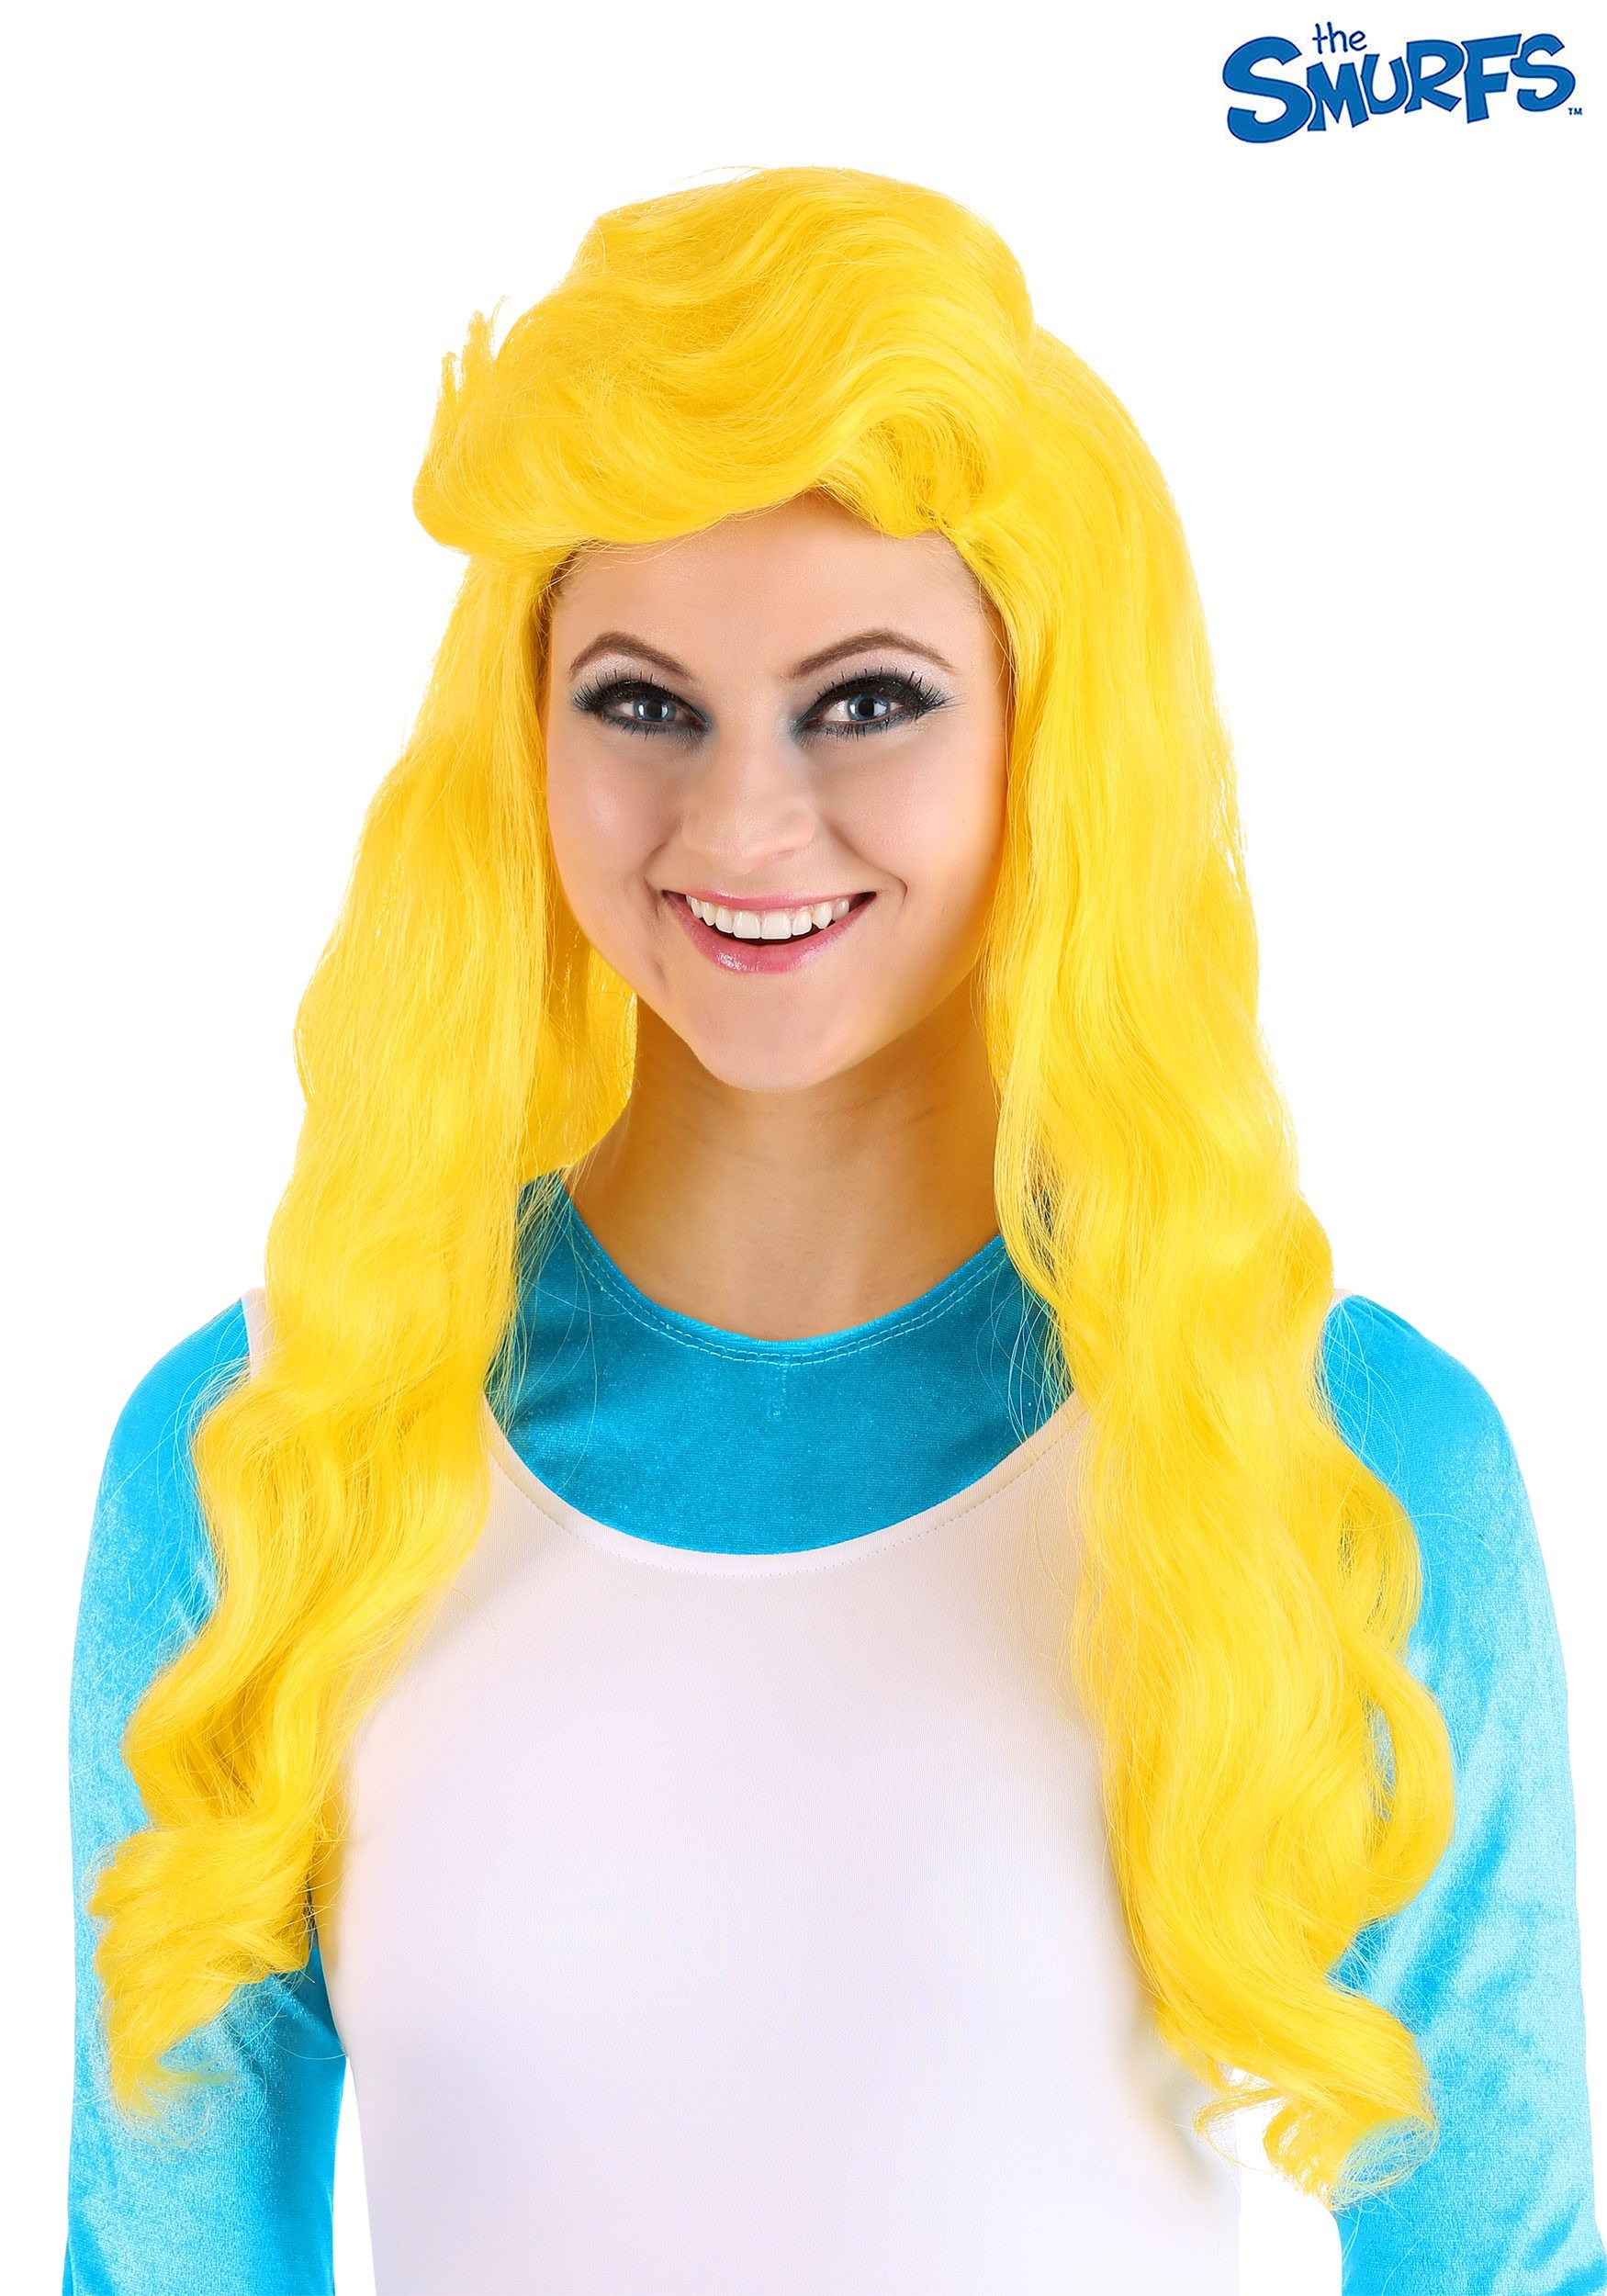 Women’s Smurfette Wig from the Smurfs